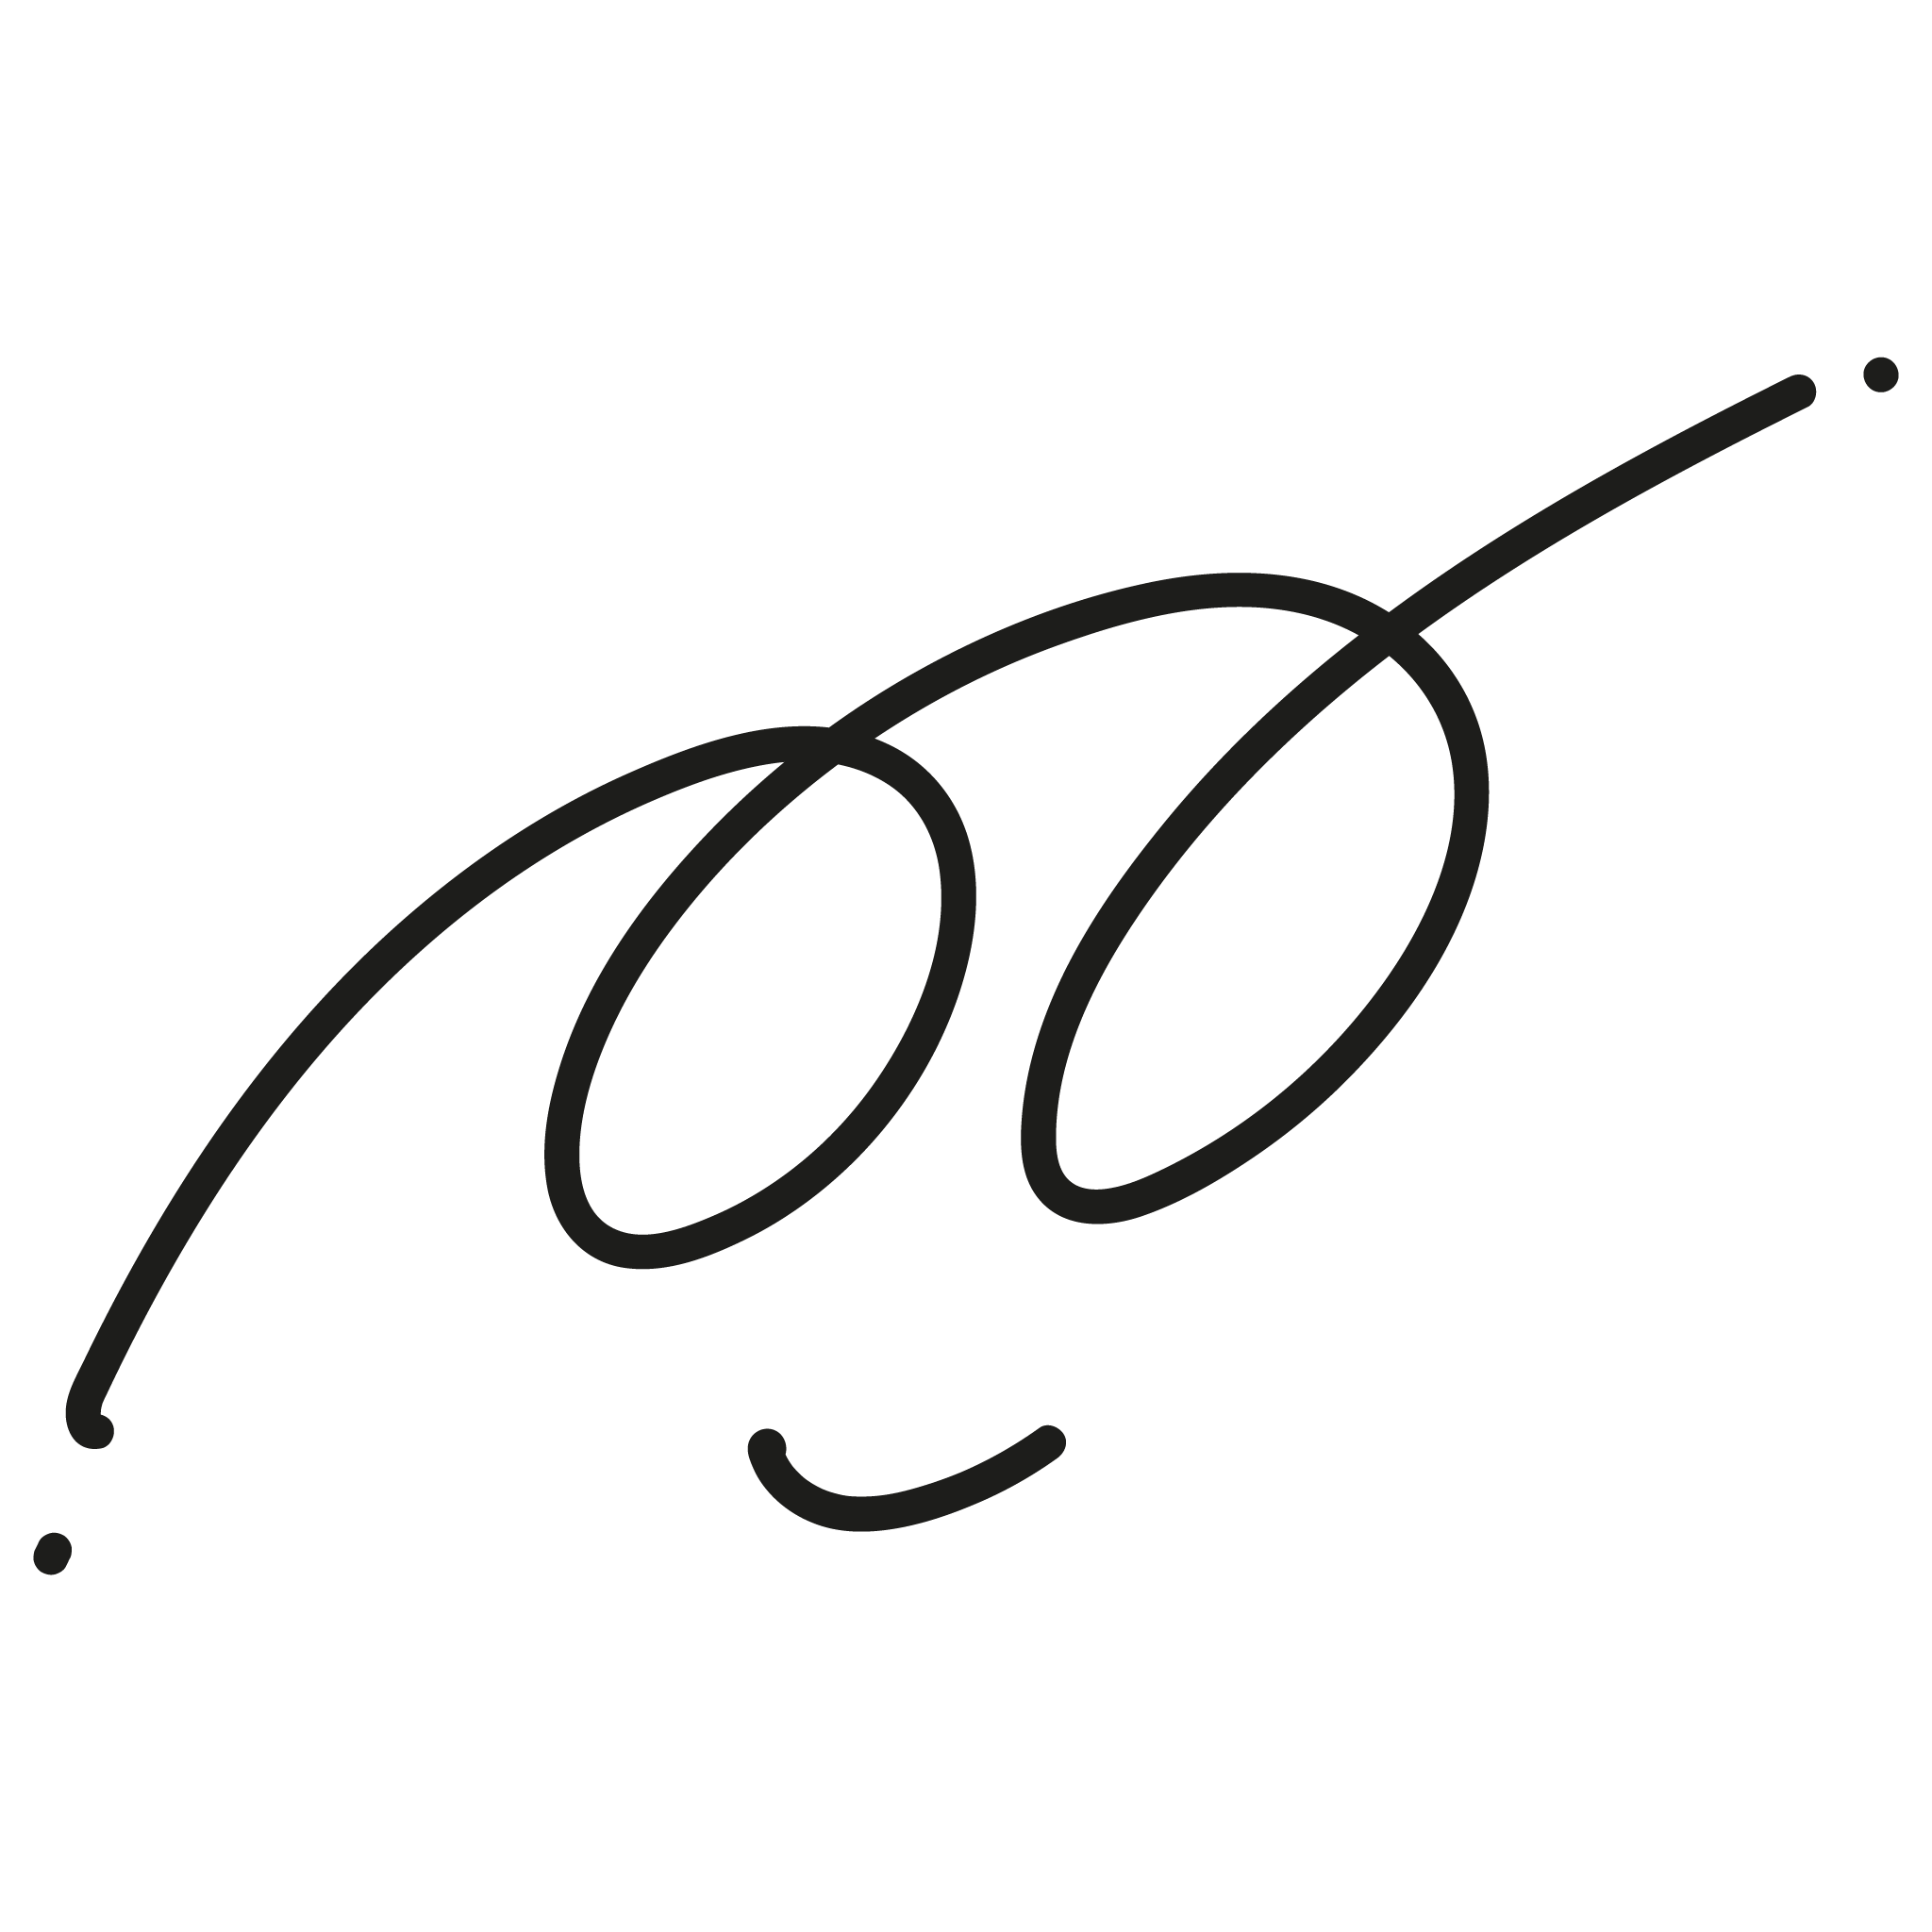 JustAdli.Page - Signature or Logo or Favicon or Brand, finalised on 19 April 2021, drafted since early 2021.